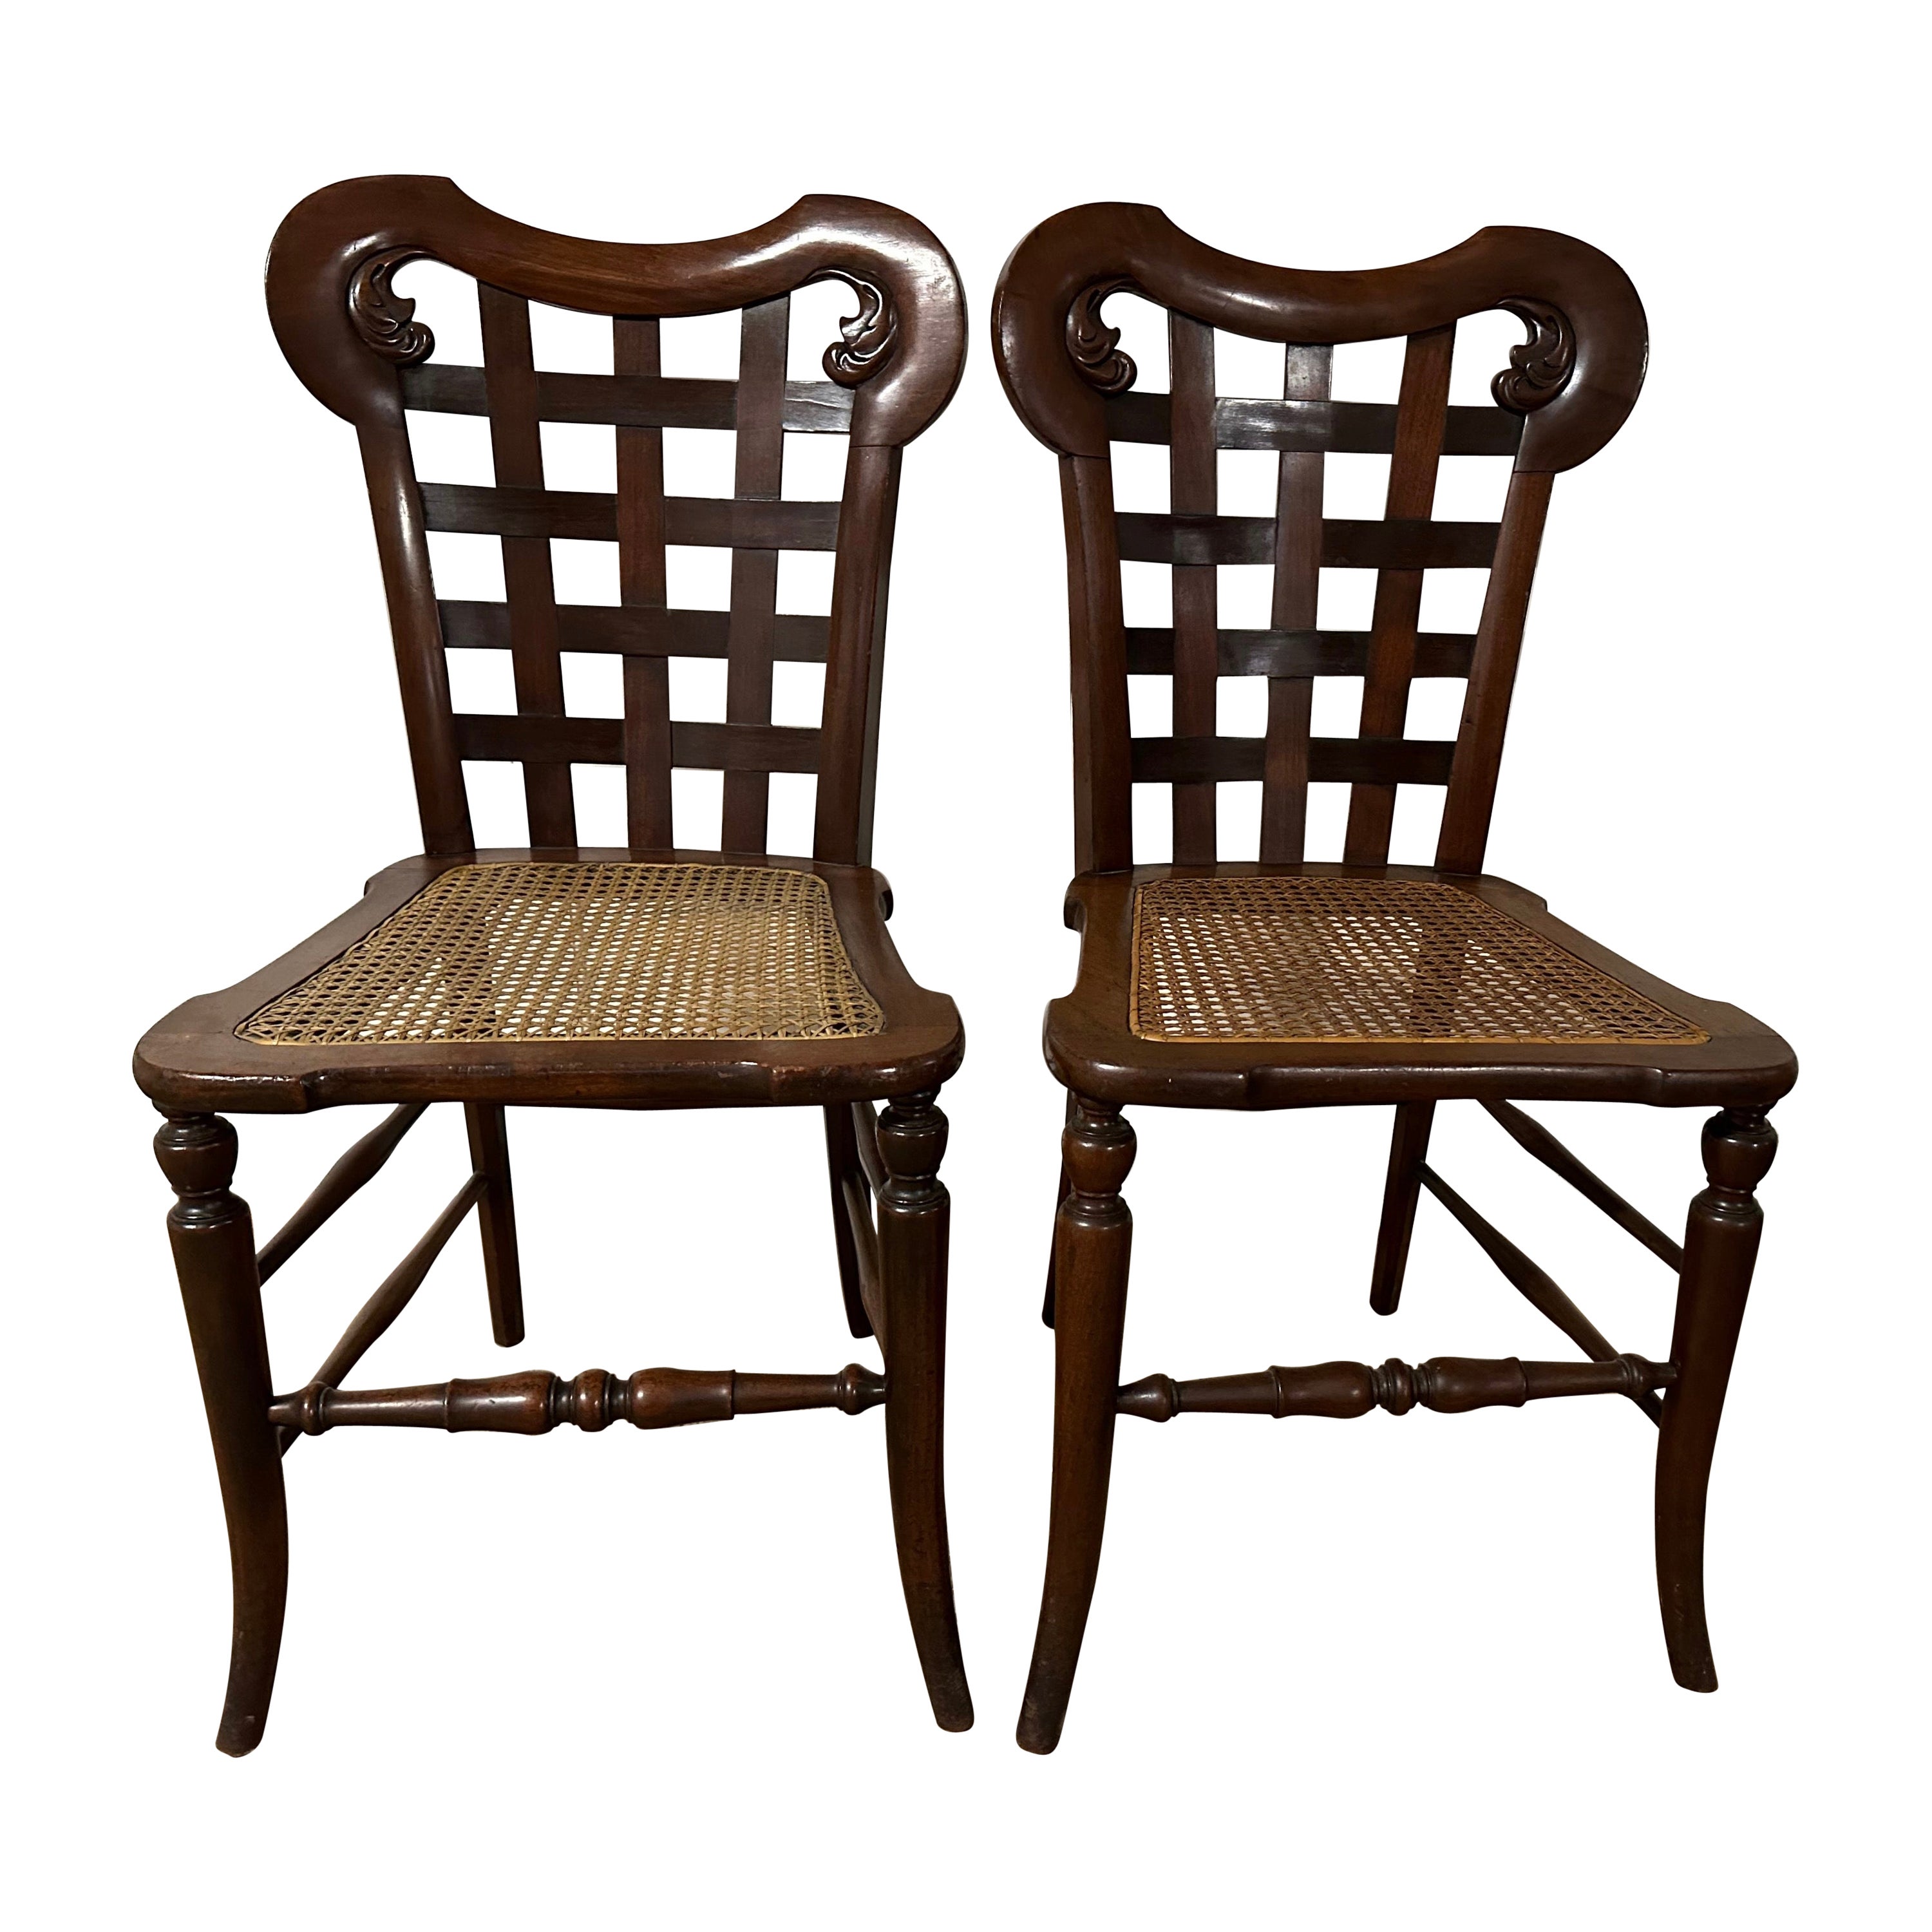 Pair of Regency Inspired Side Chairs with Caned Seats